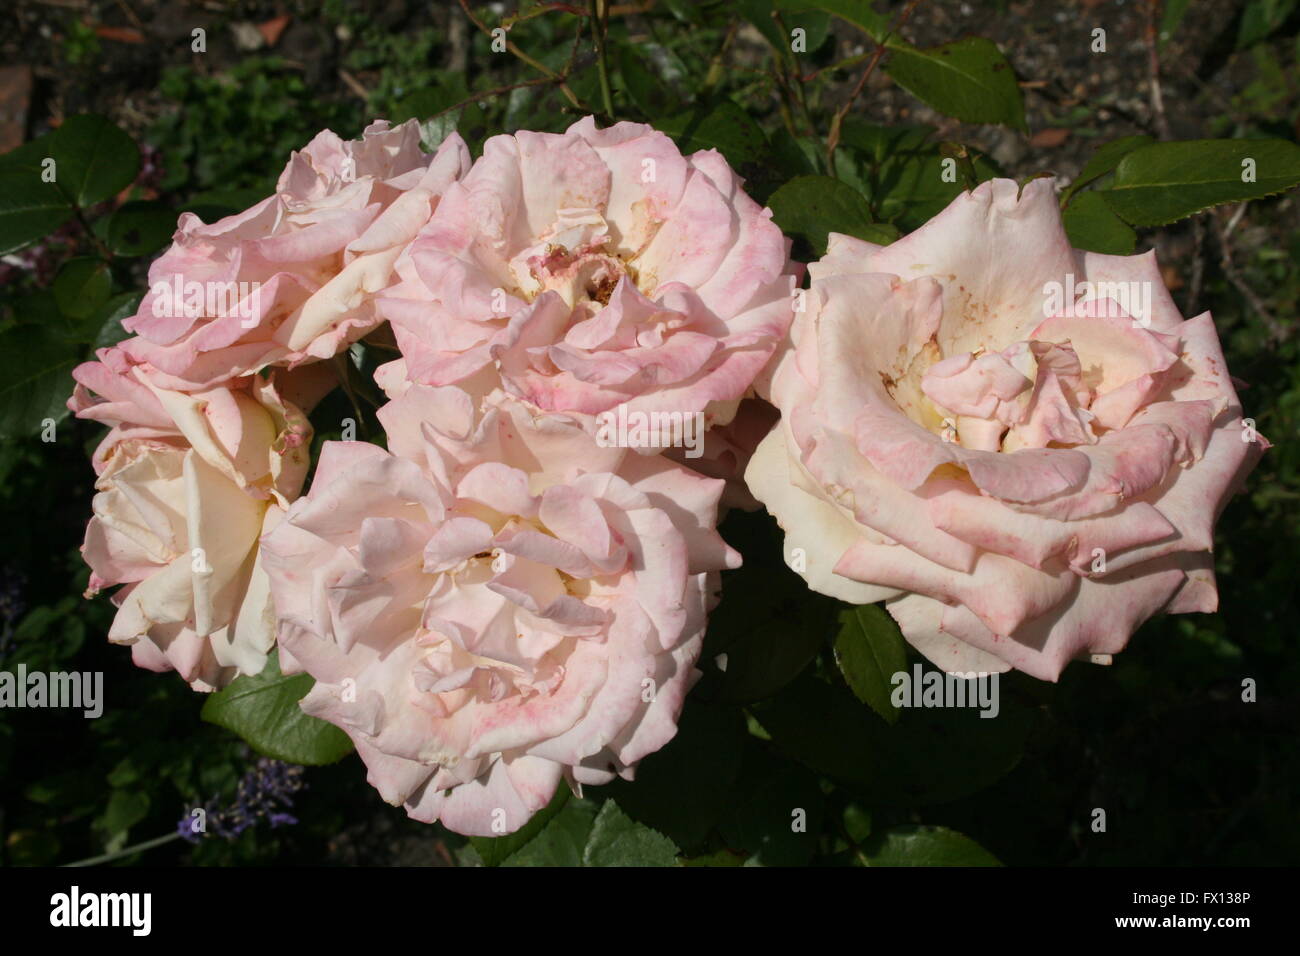 Pink summer roses Stock Photo